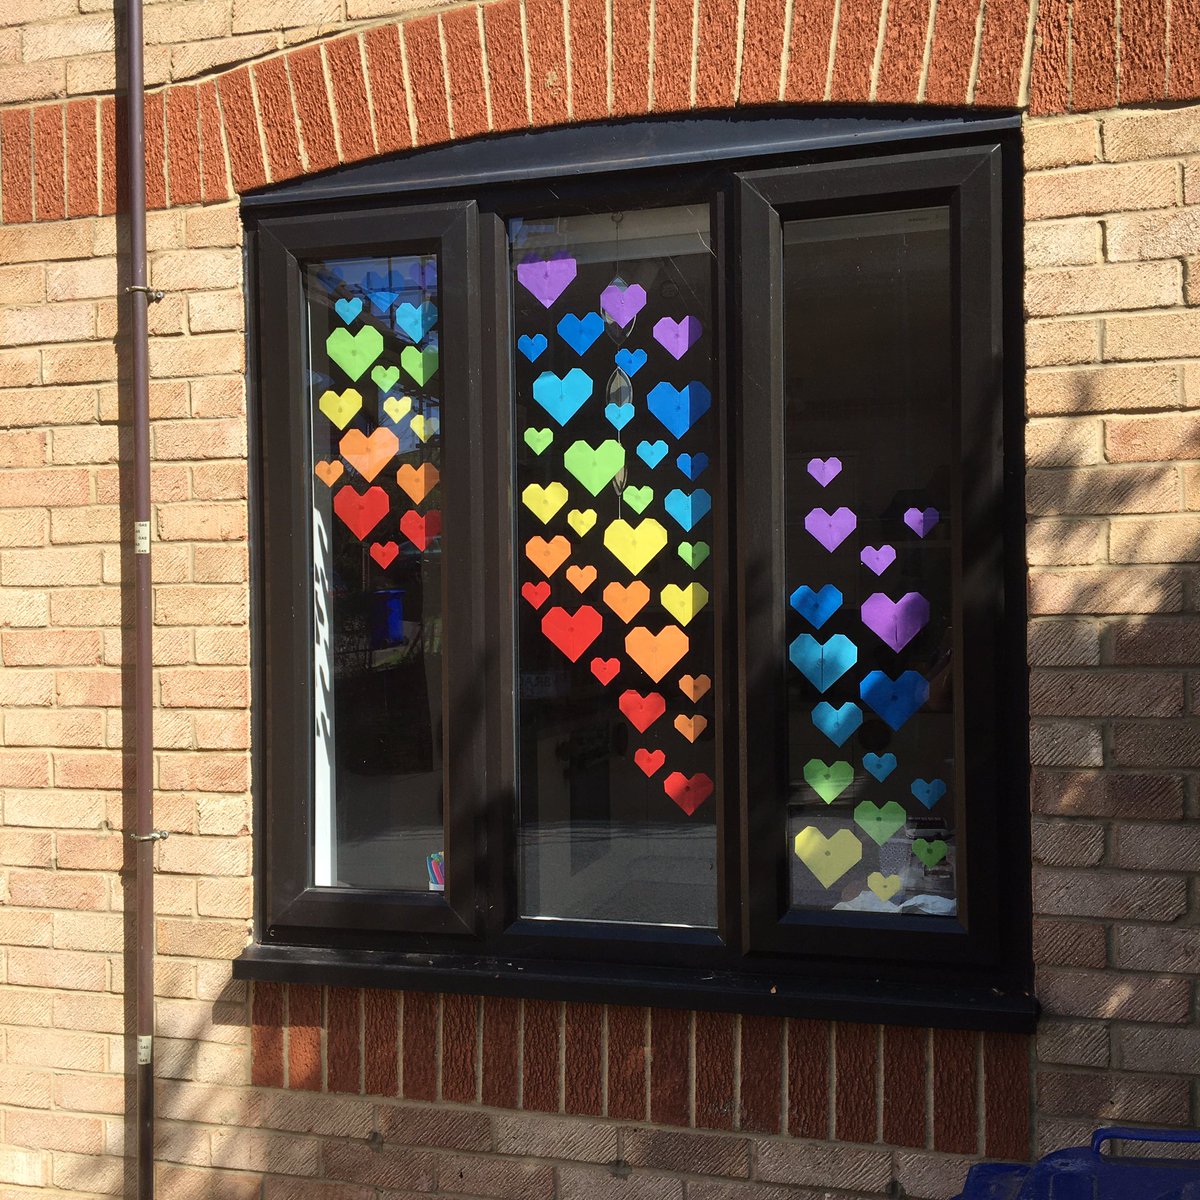 5) Finally, put up your display! I used a glue gun to stick my hearts up, but glue stick or sticky tape will work too. Have fun and do post pics of your rainbow heart windows! 